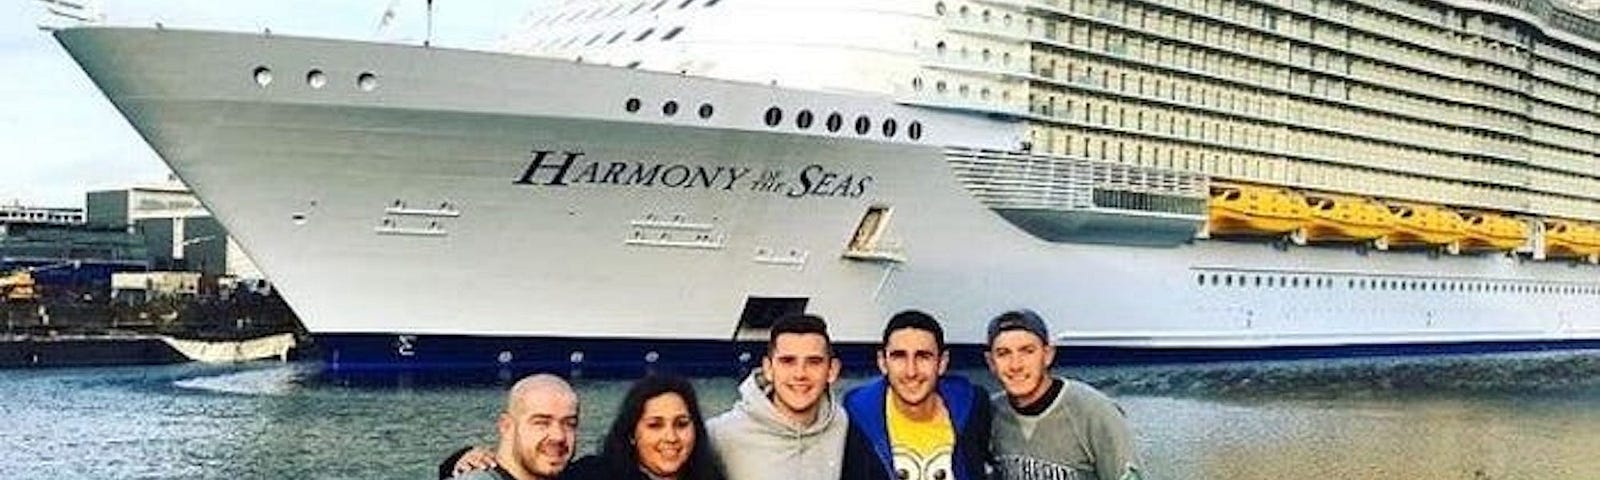 A group of people take a photo while standing in front of a cruise ship.